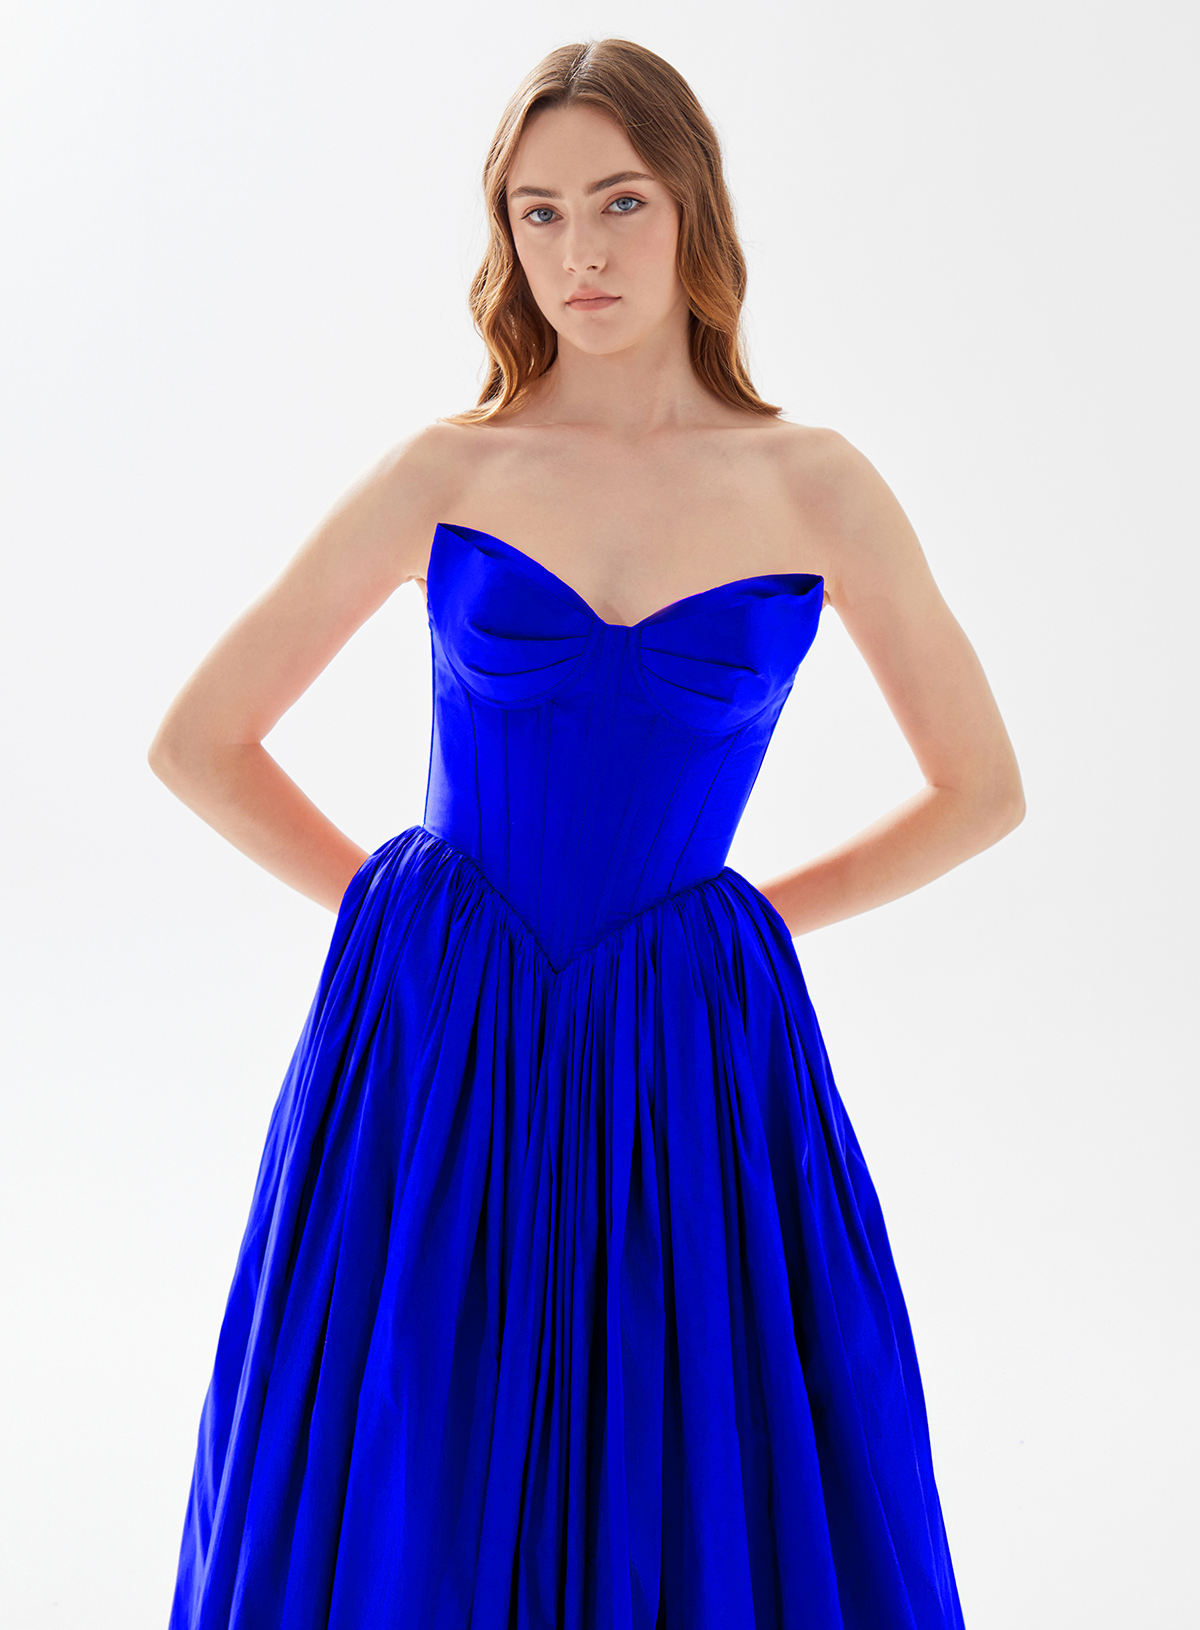 Picture of Royal Blue Dress Of The Life